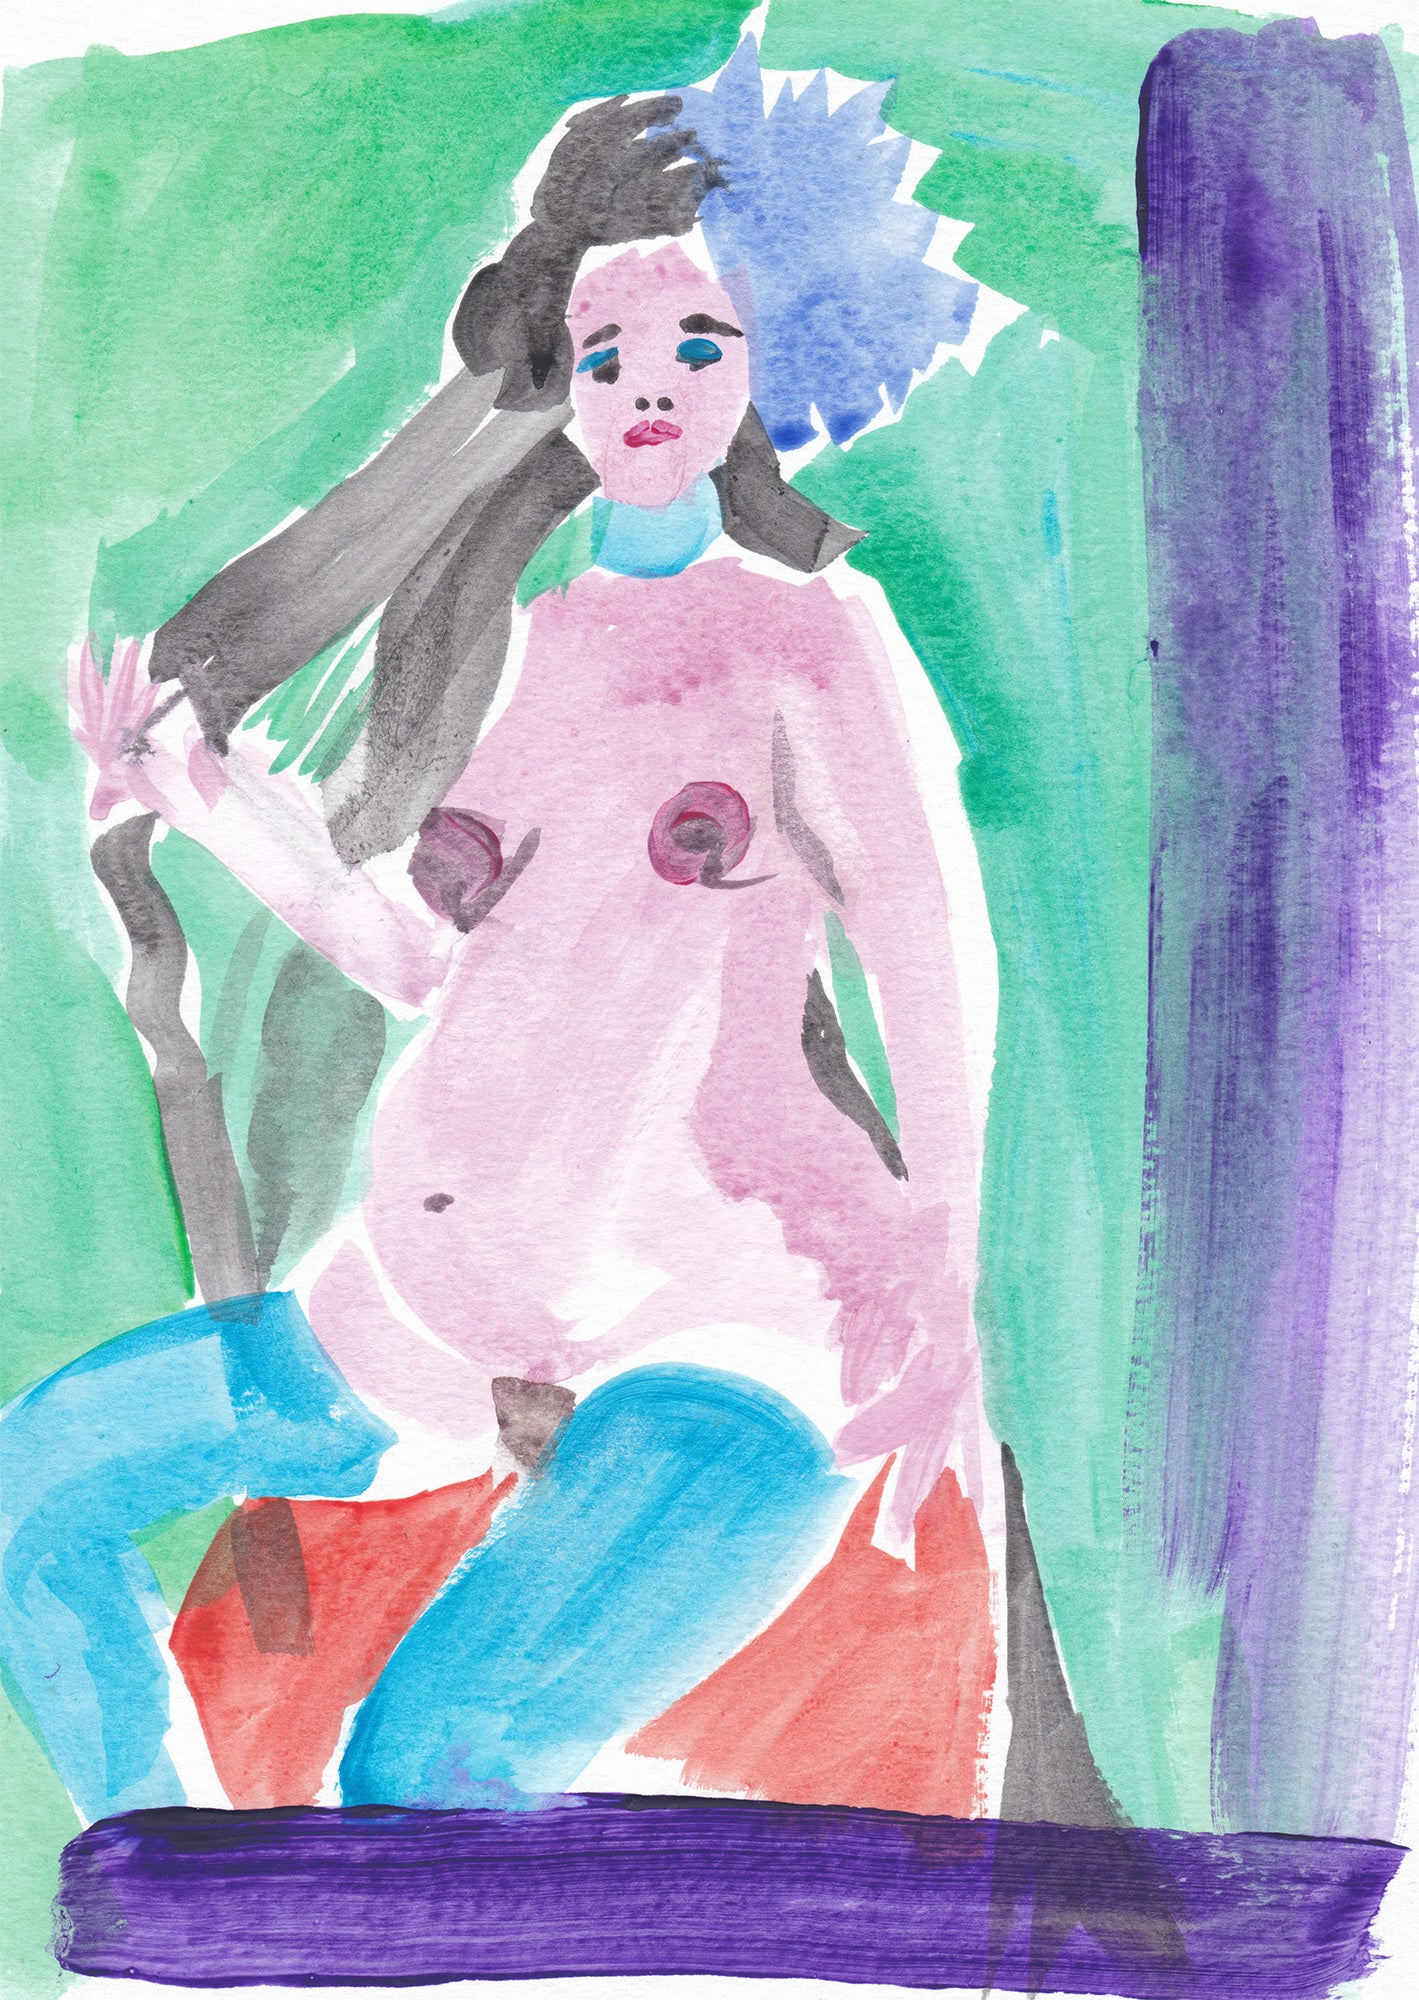 Painting sketch of a pregnant woman wearing blue stockings